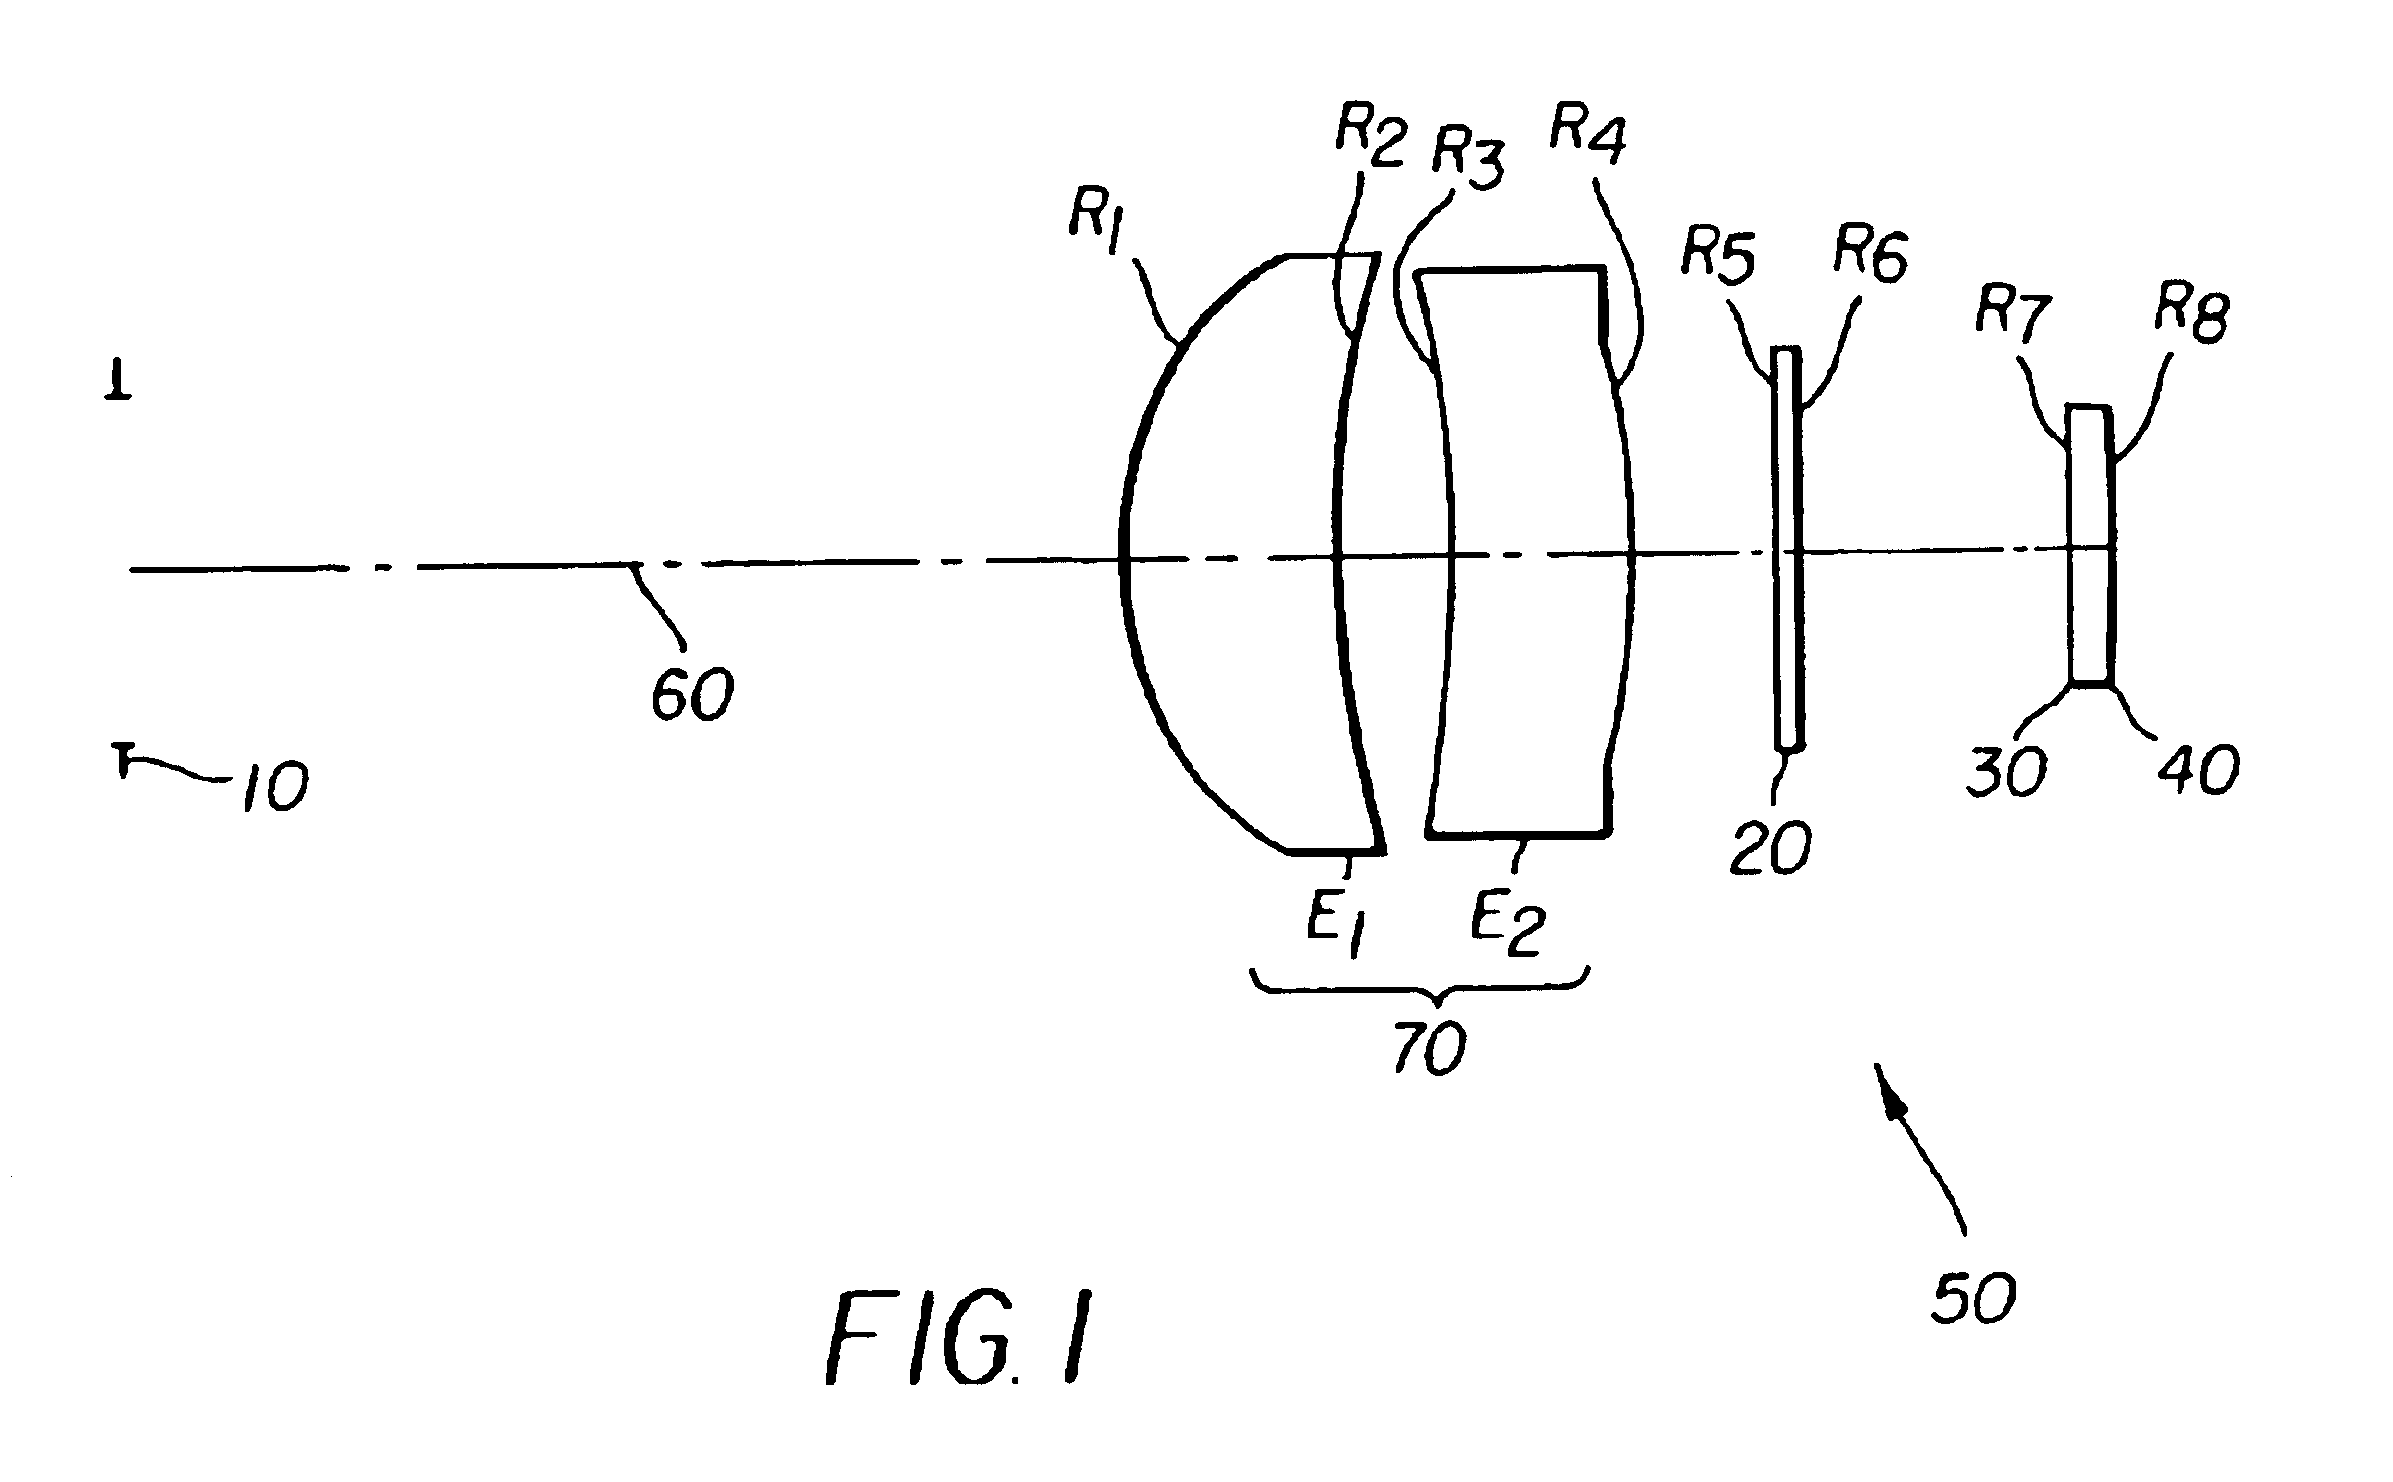 Optical magnifier suitable for use with a microdisplay device